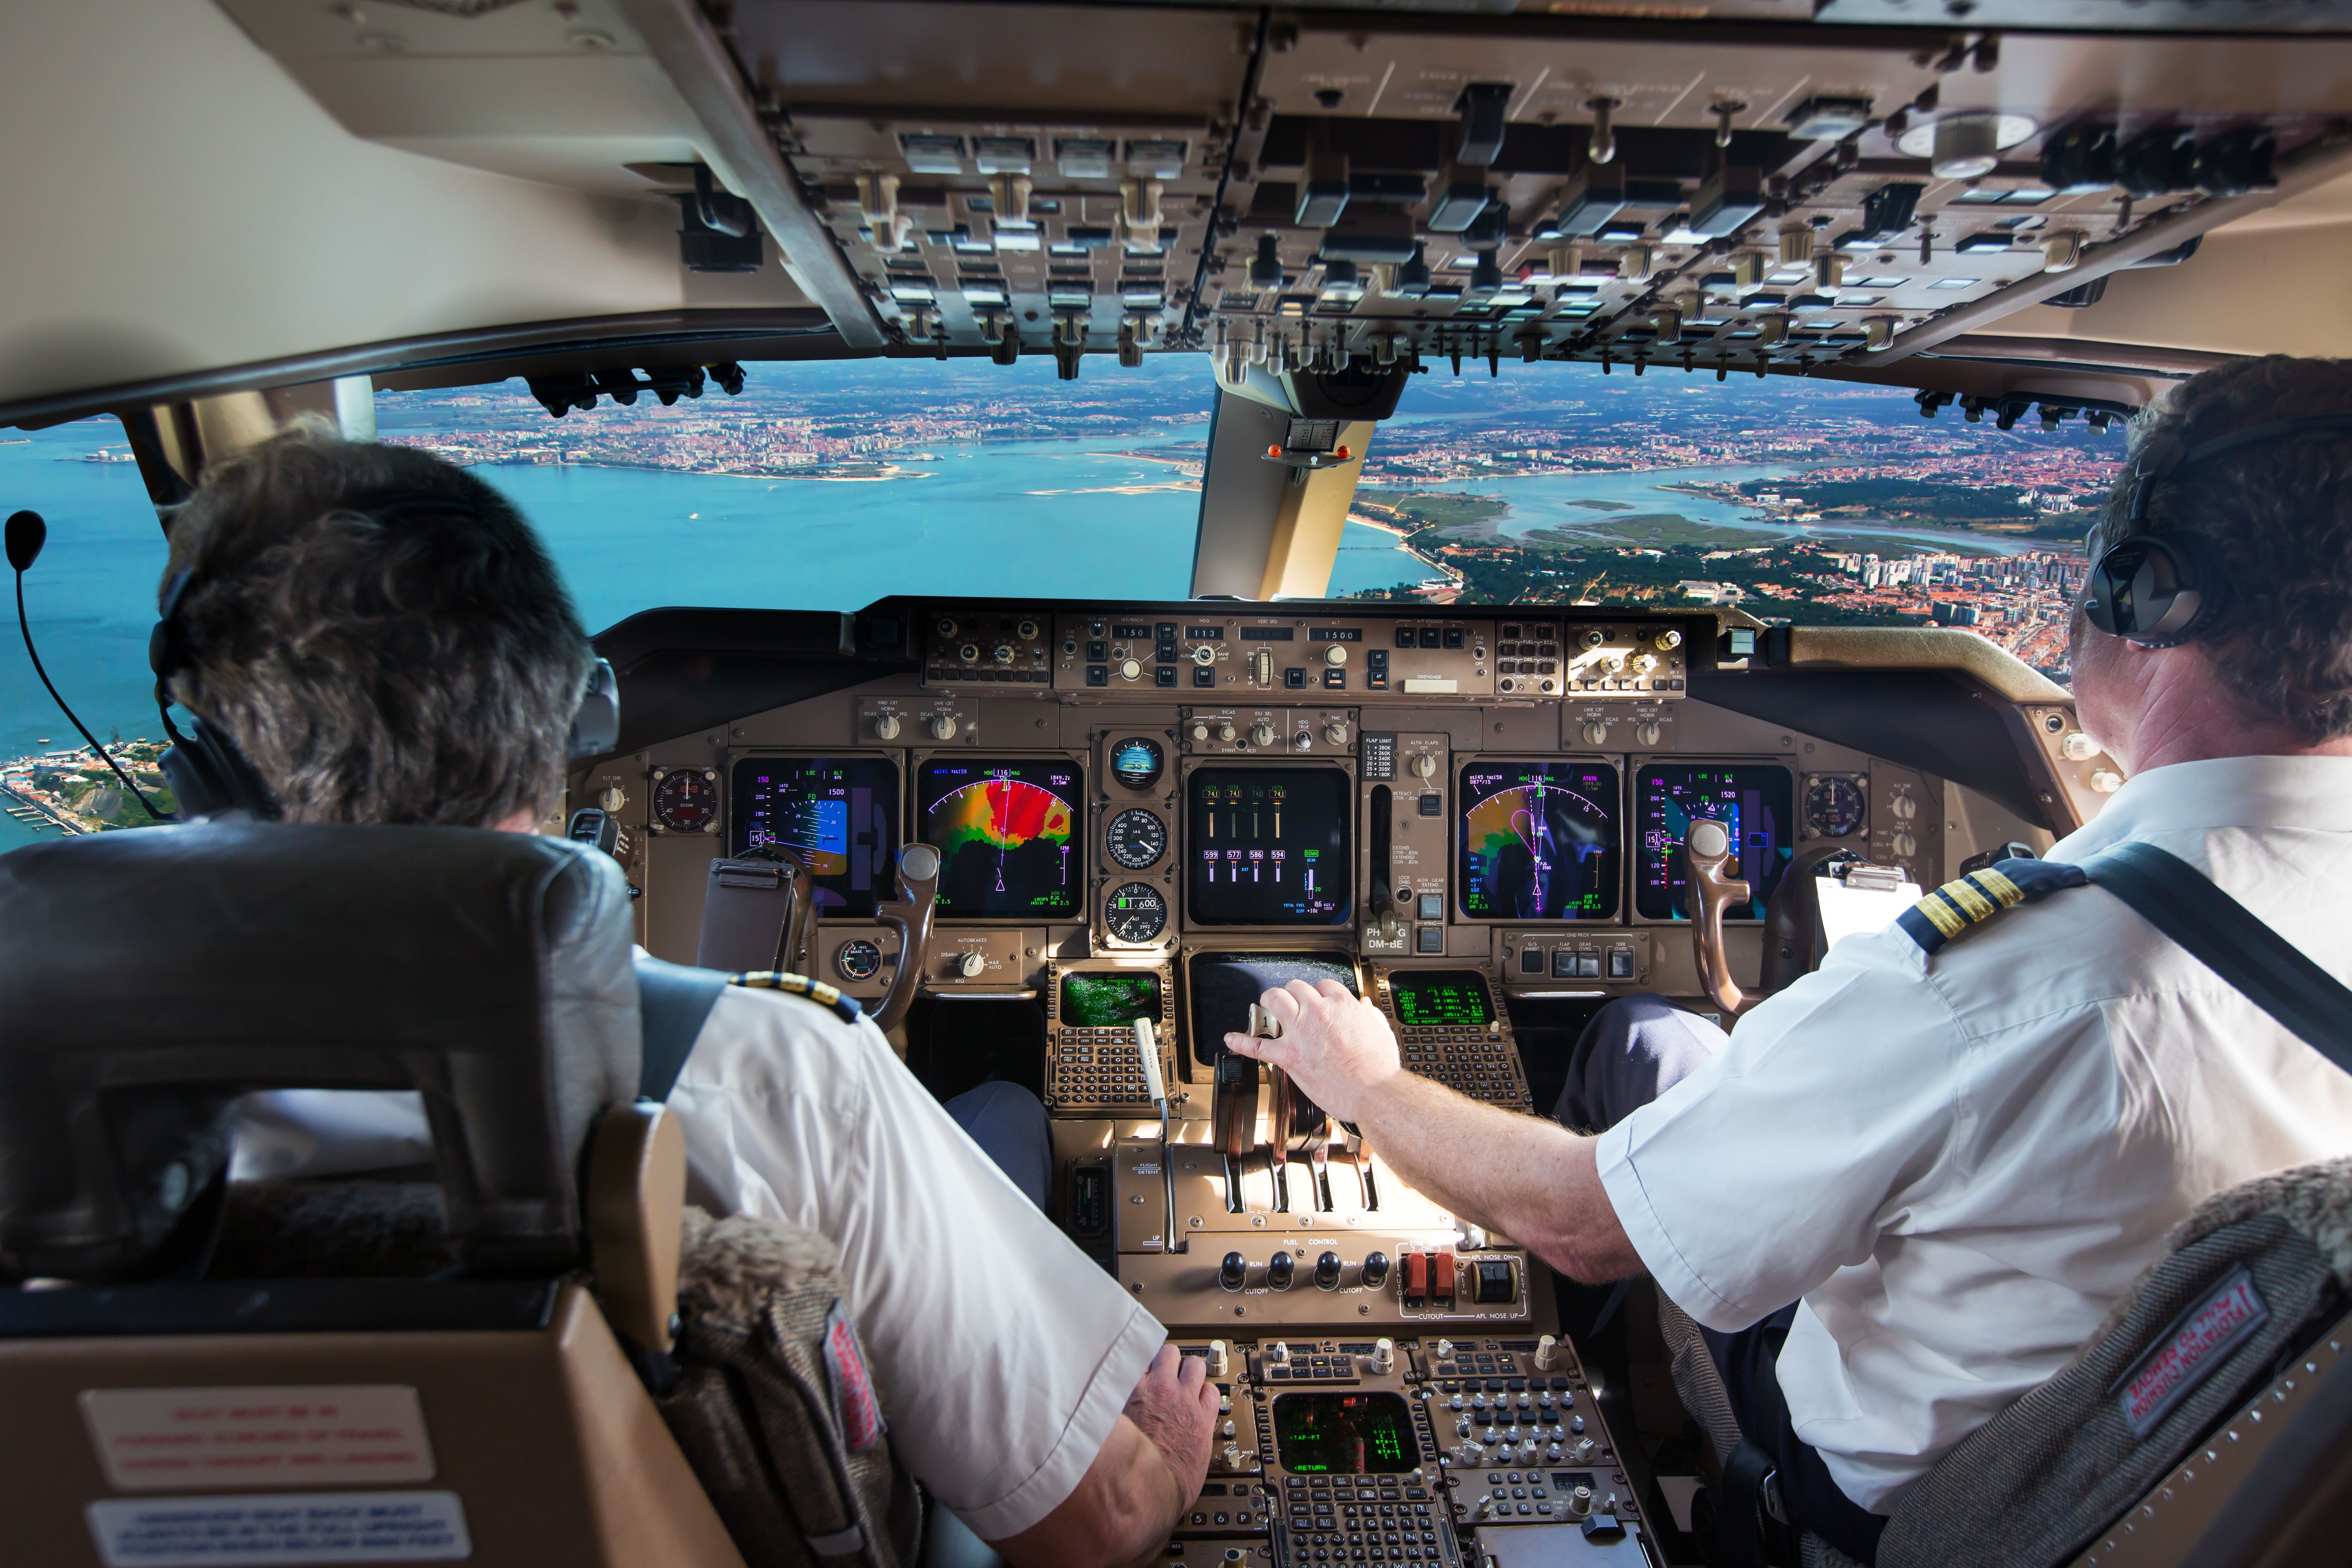 View from the cockpit of two pilots preparing to land an aircraft.